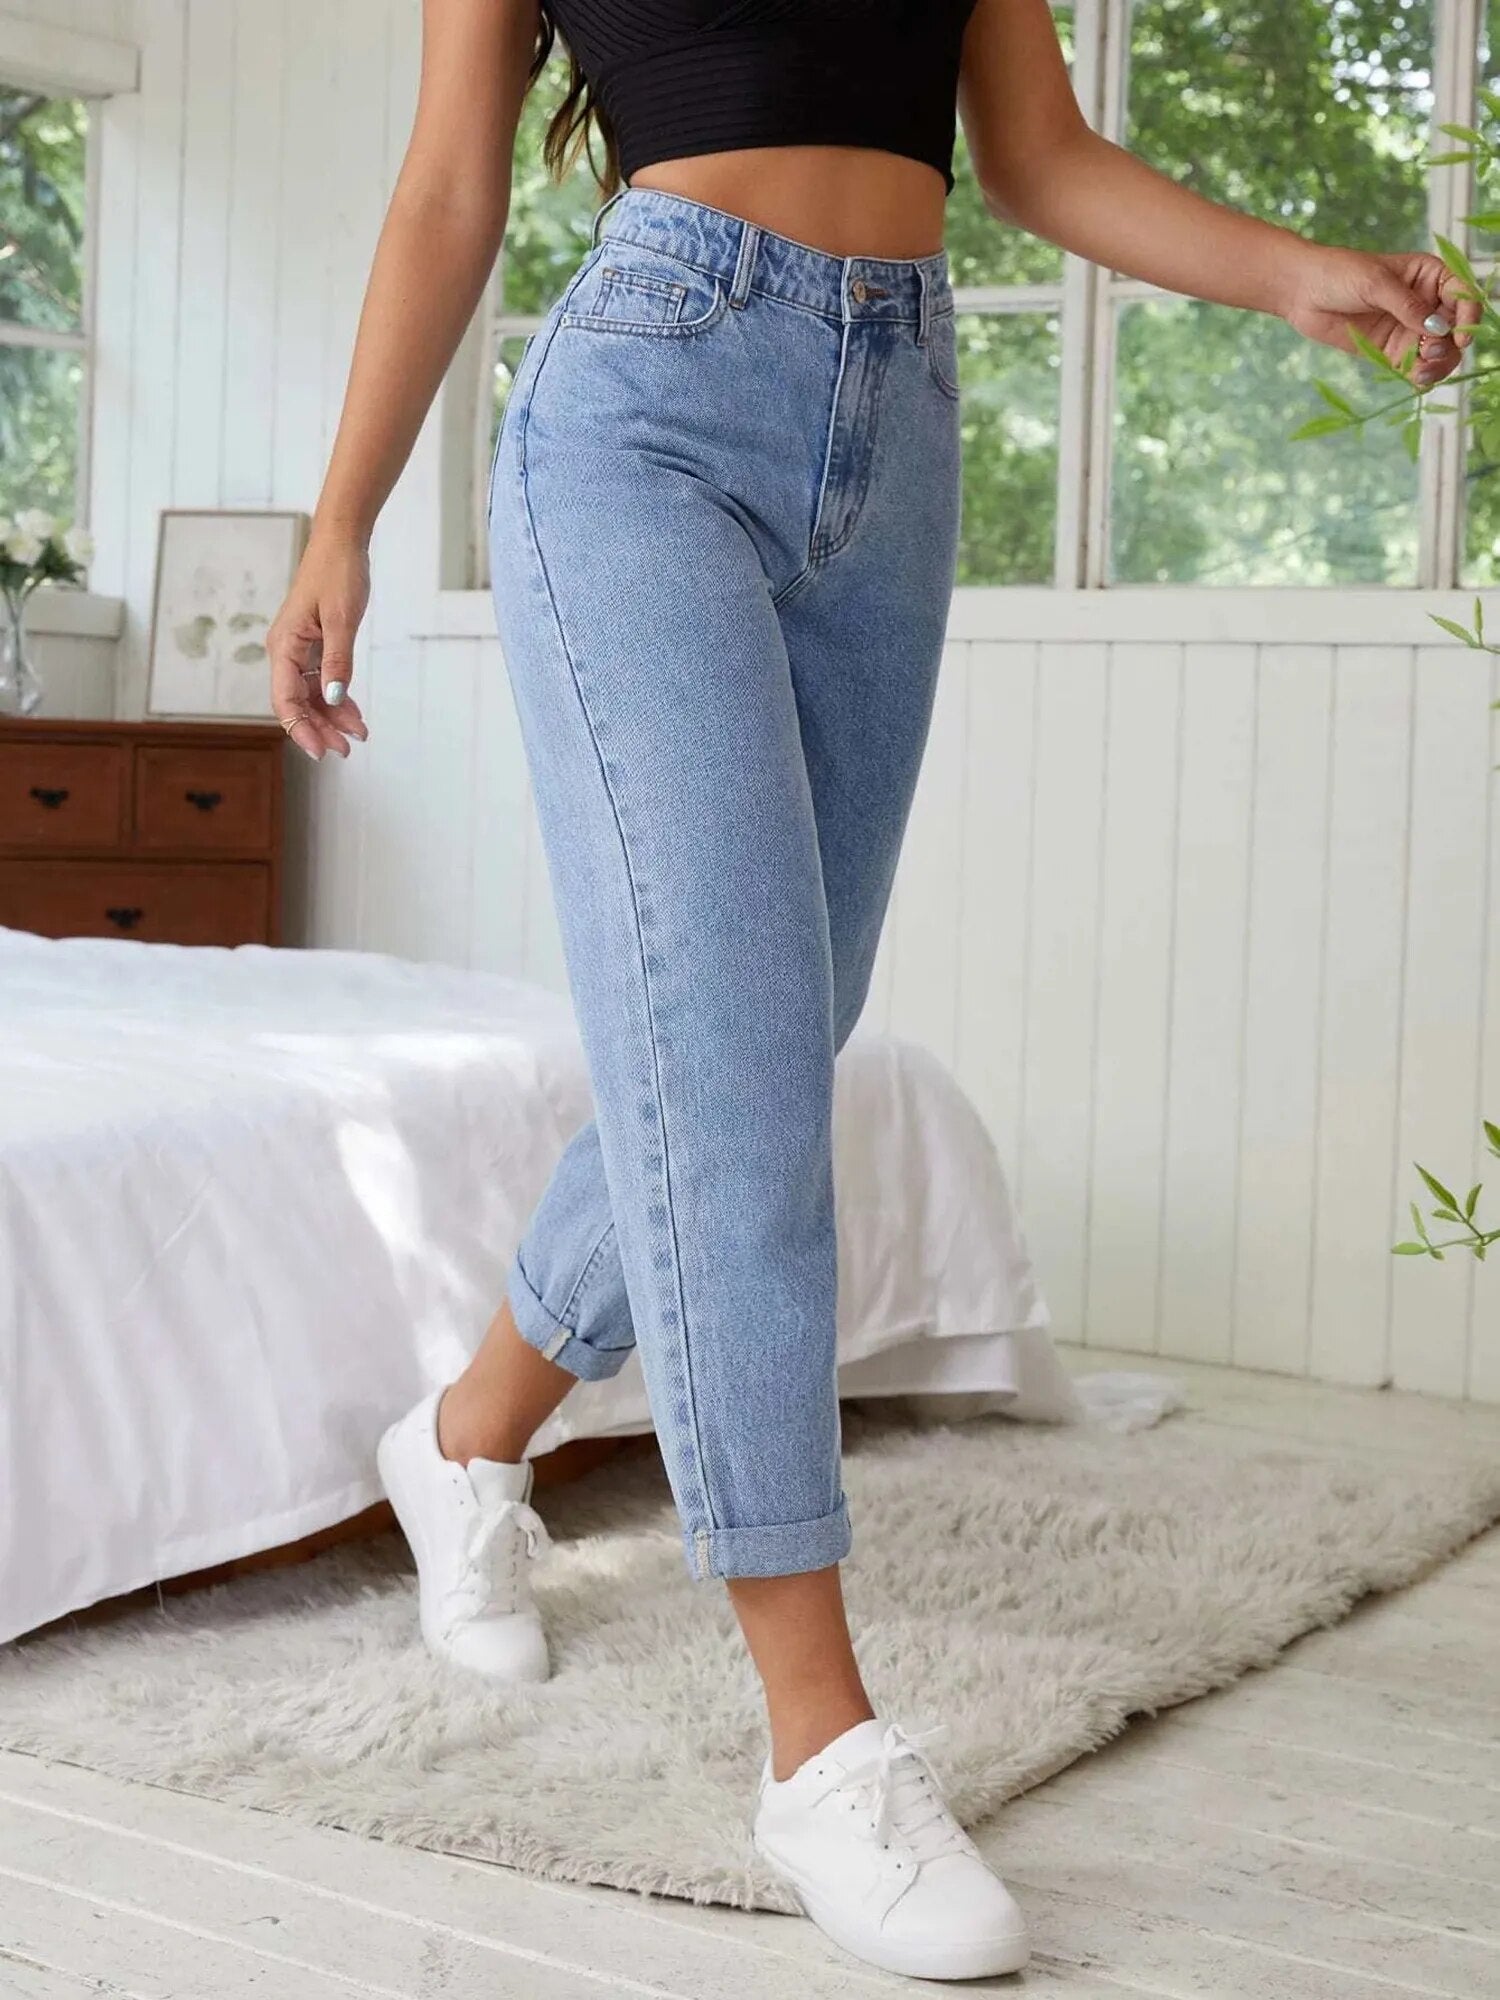 Plus Size Jeans for Women Light Blue Harem Jeans Women High Waist Stretchy Ankle Jeans 100 Kgs Spring and Summer Jeans for Mom